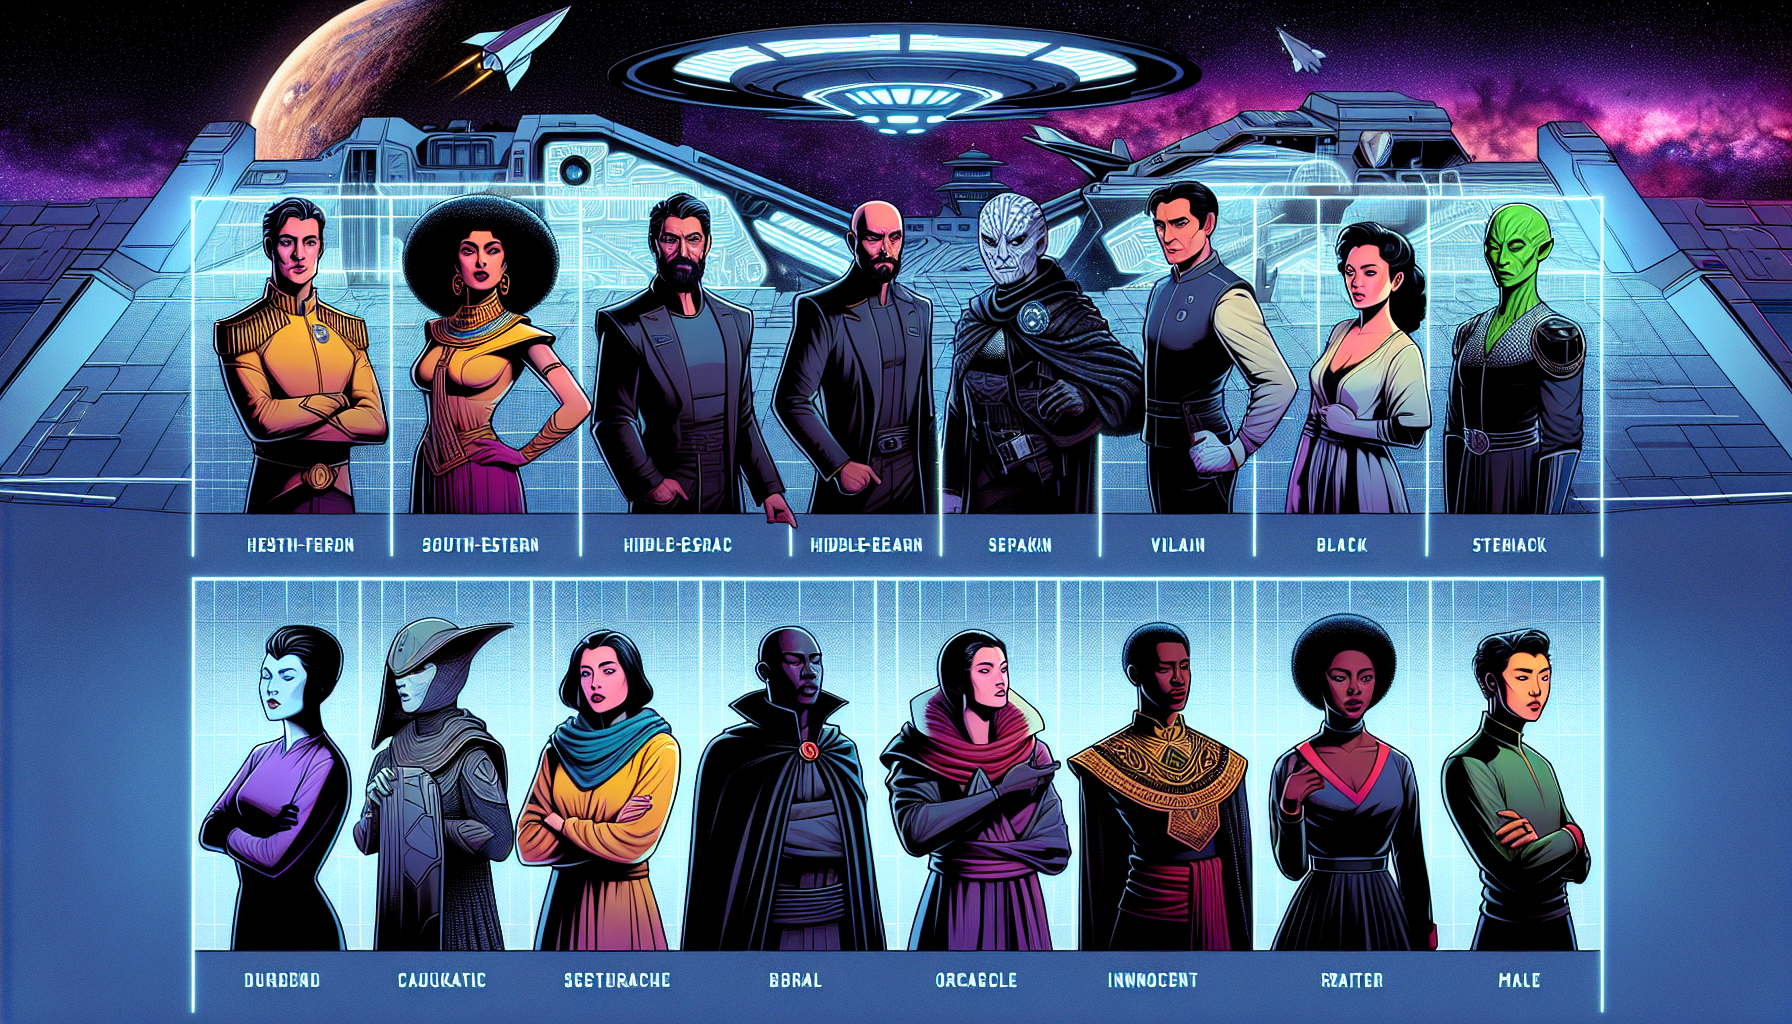 An illustrated lineup of ten diverse archetypal characters in a futuristic science fiction setting, each character distinctly representing a classic archetype such as the hero, the mentor, the villain